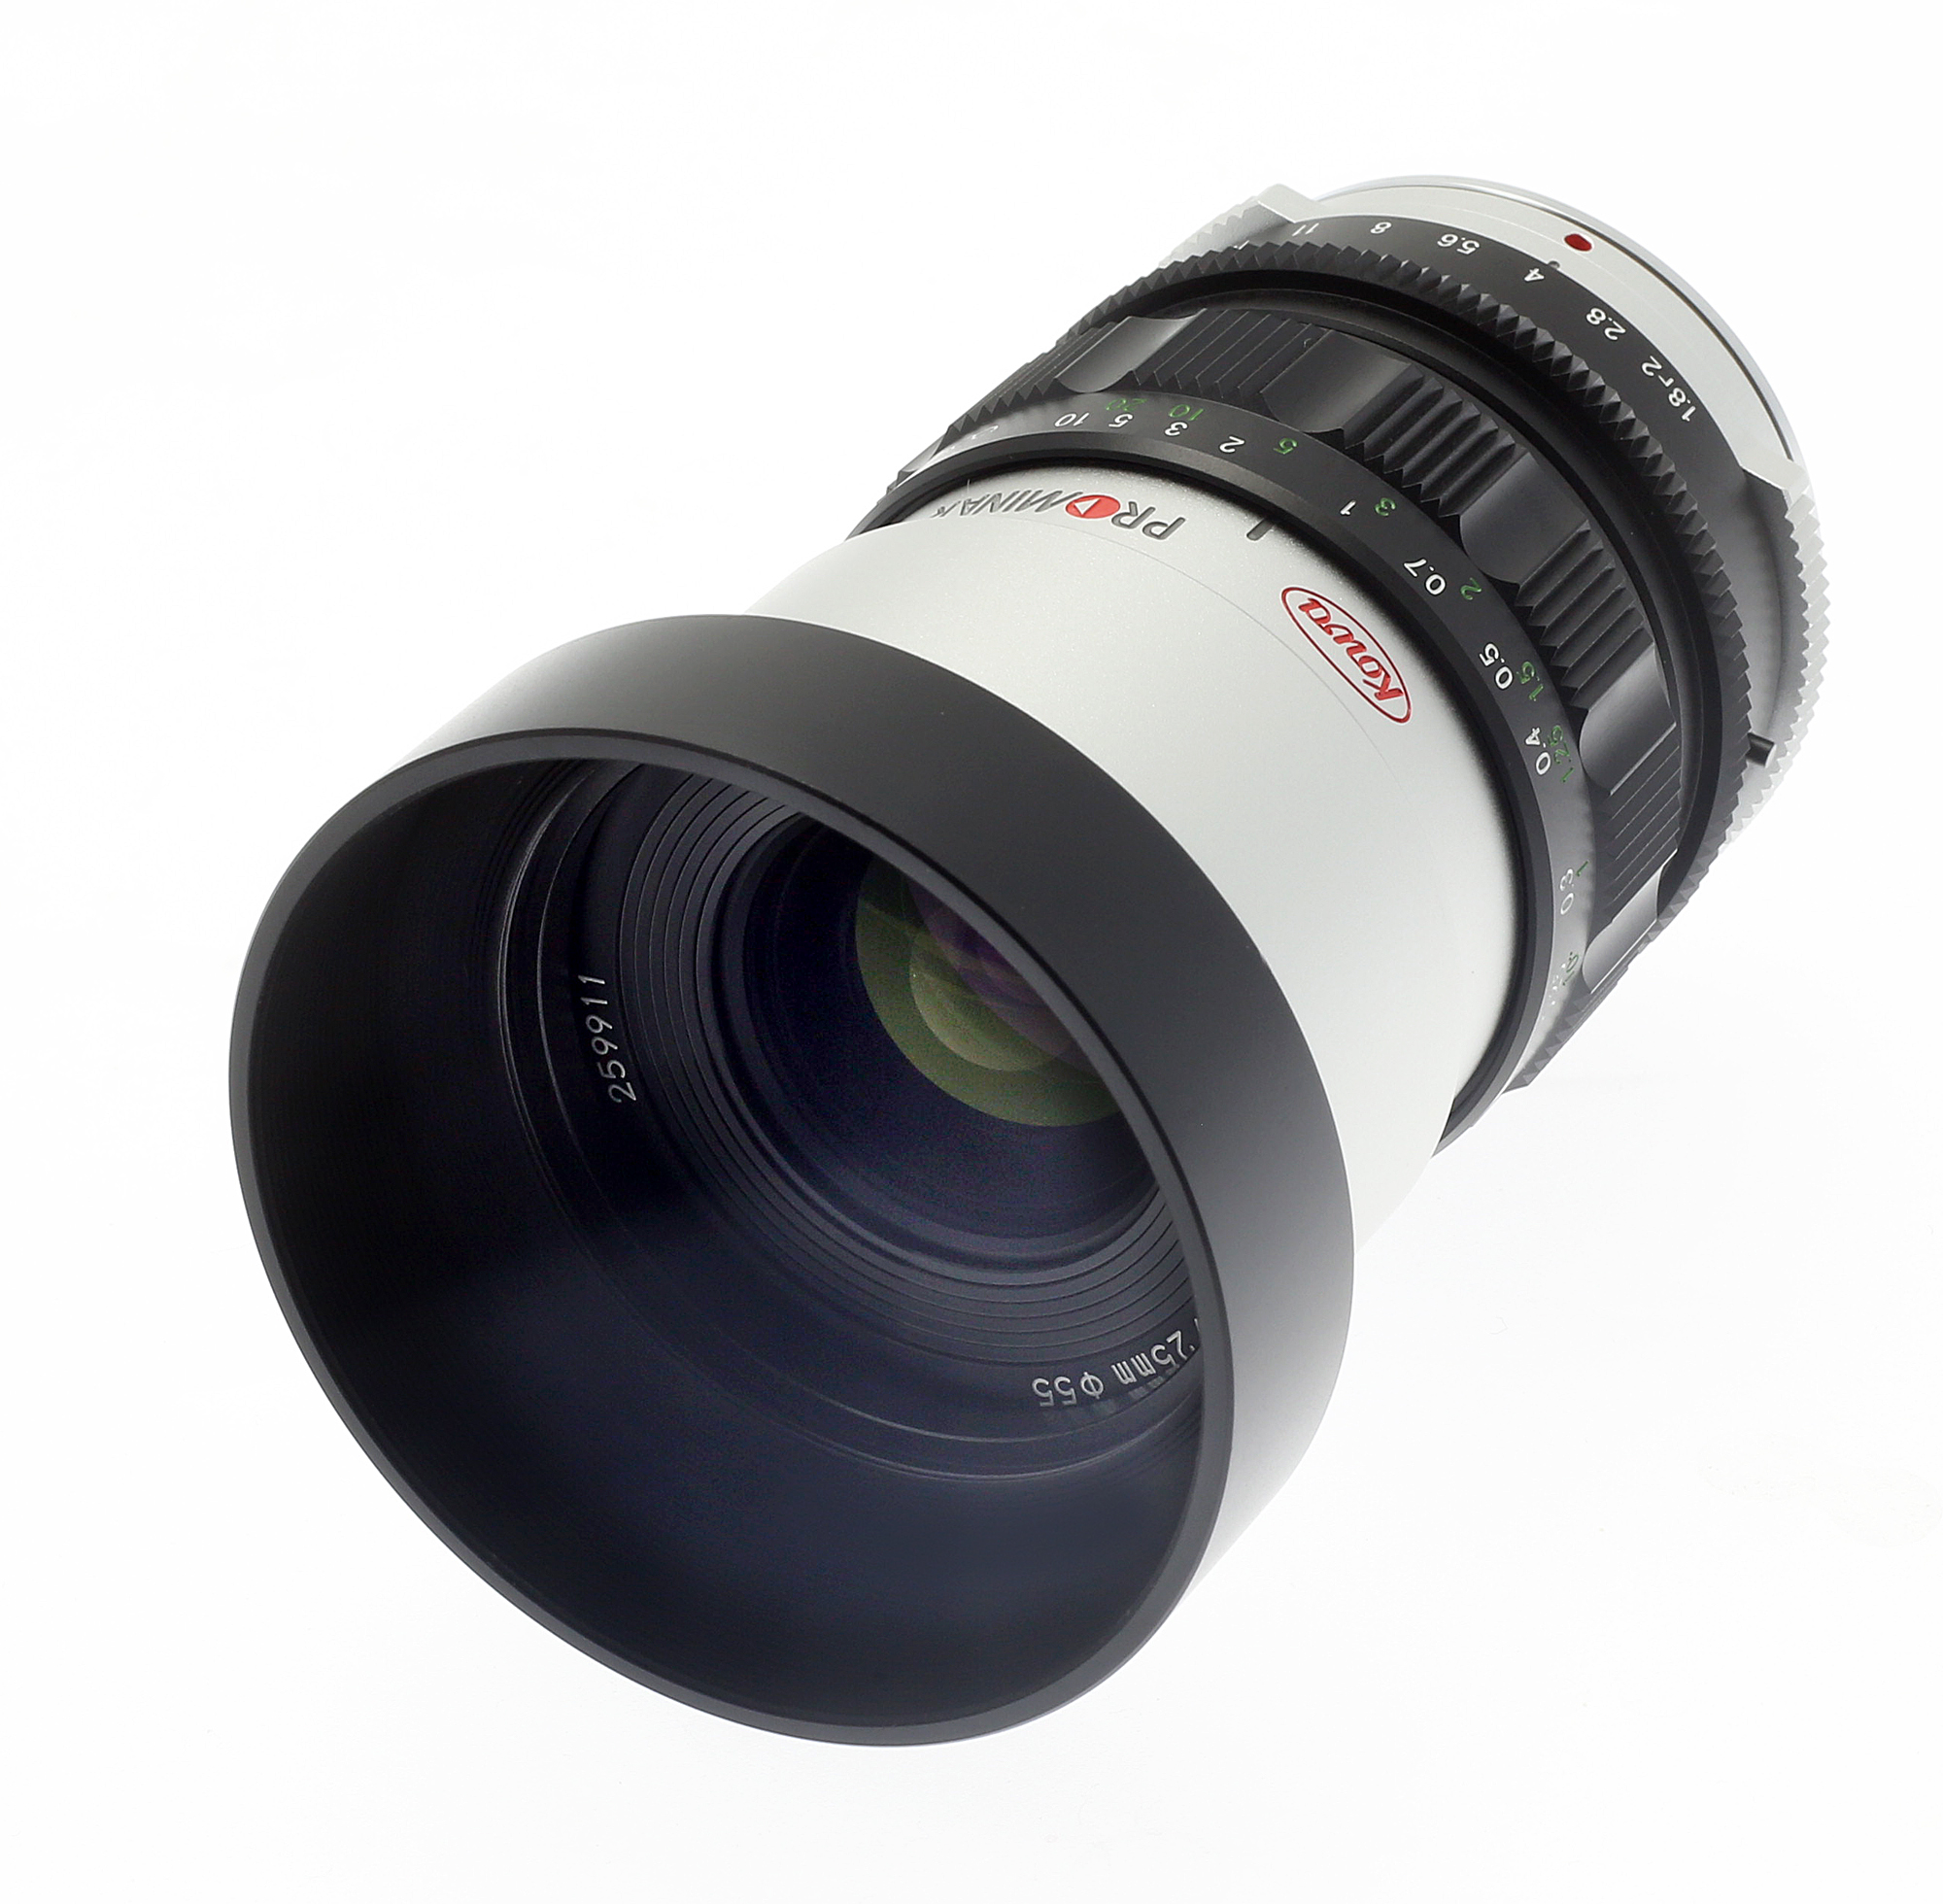 25mm f1.8 Lens with Micro Four Third Mount